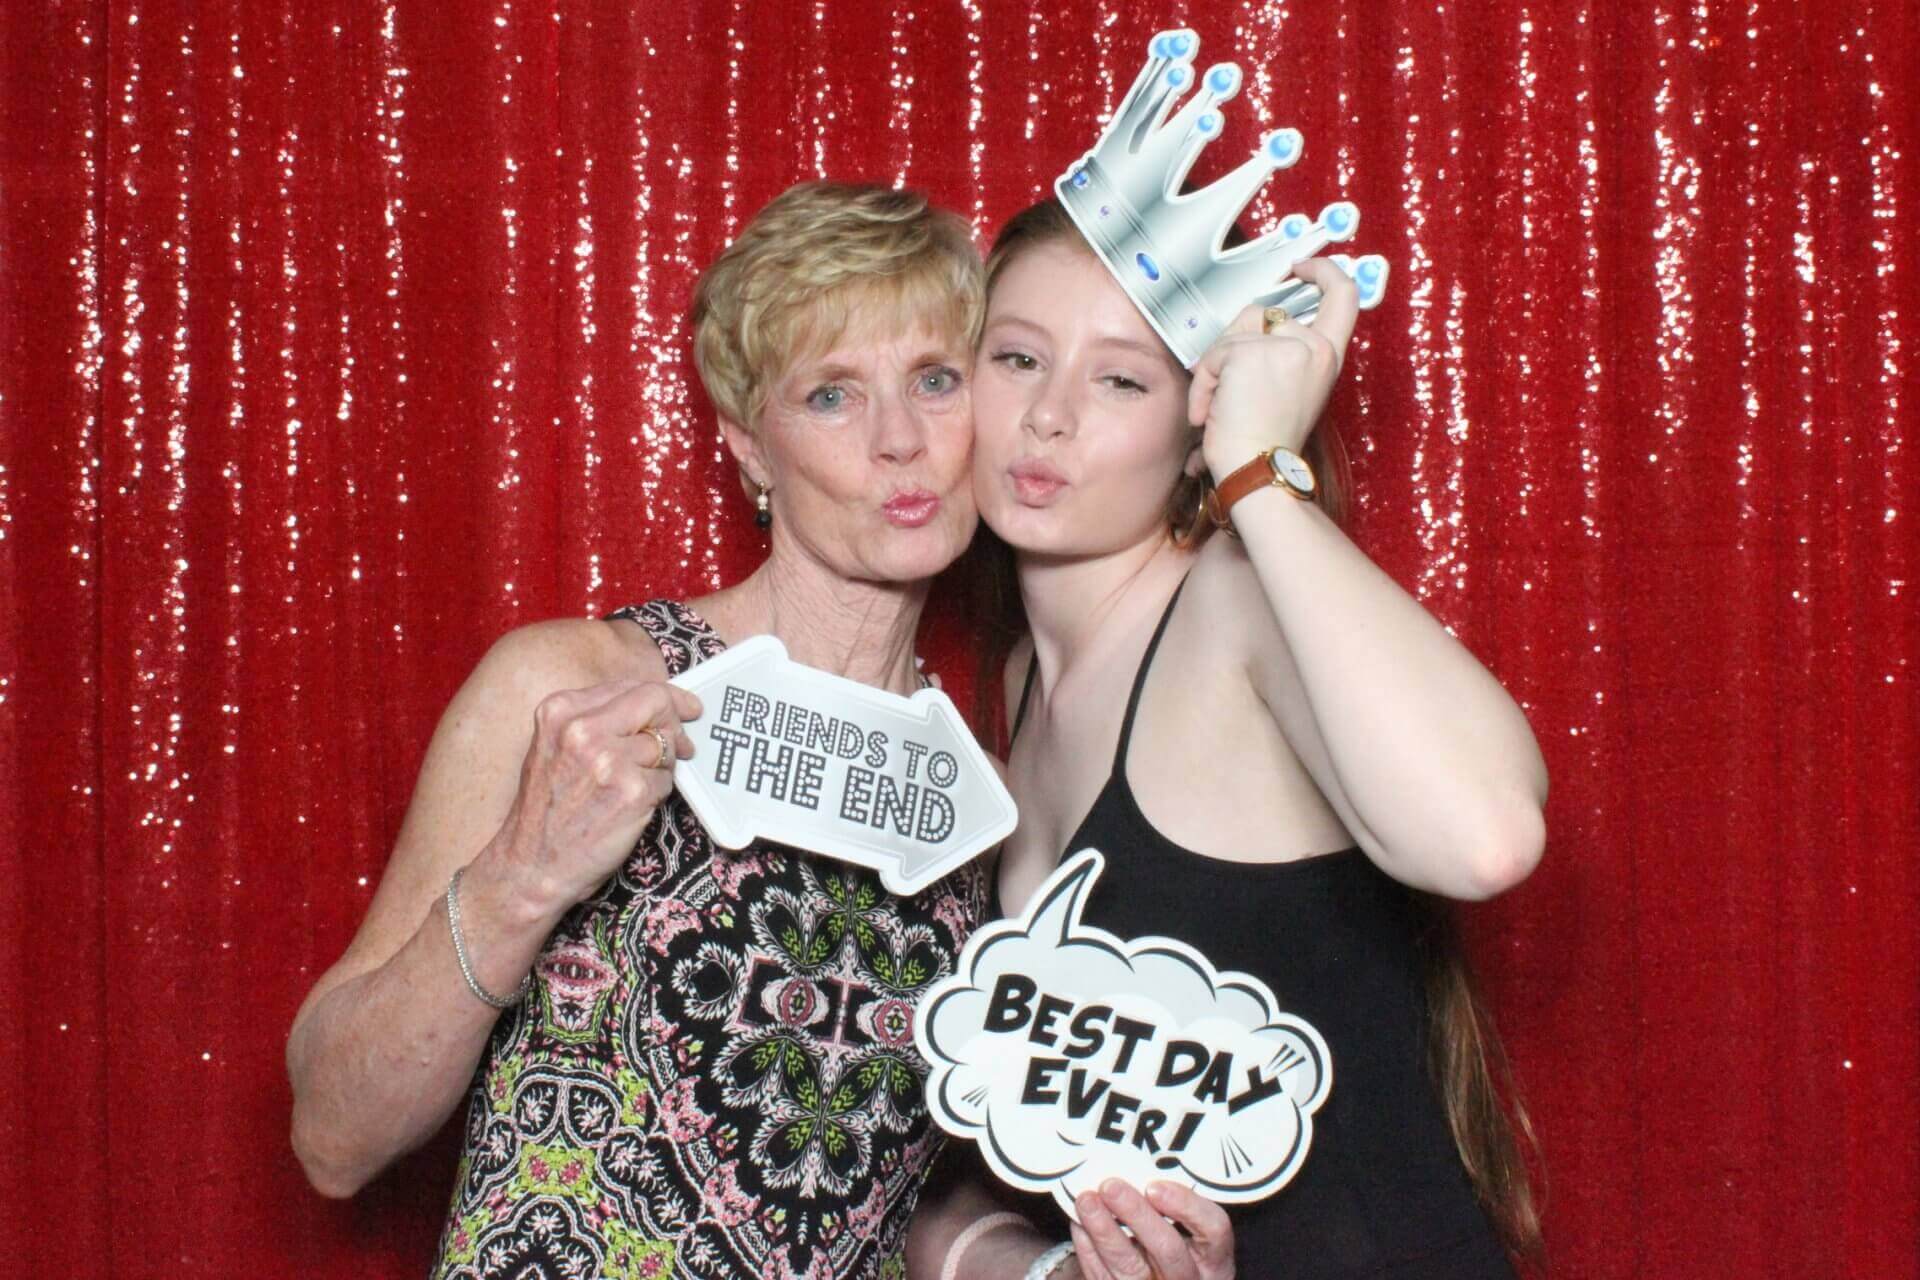 Photo booth rental in Toronto for an event. Posing in front of a red sequin backdrop offered by LOL Photo Booth. Tags: Event planning ideas, Photo booth prints, high resolution photos, Toronto photo booth rental services. GIFS, Boomerangs, Mosaic Walls, Slow motion, brand activation.